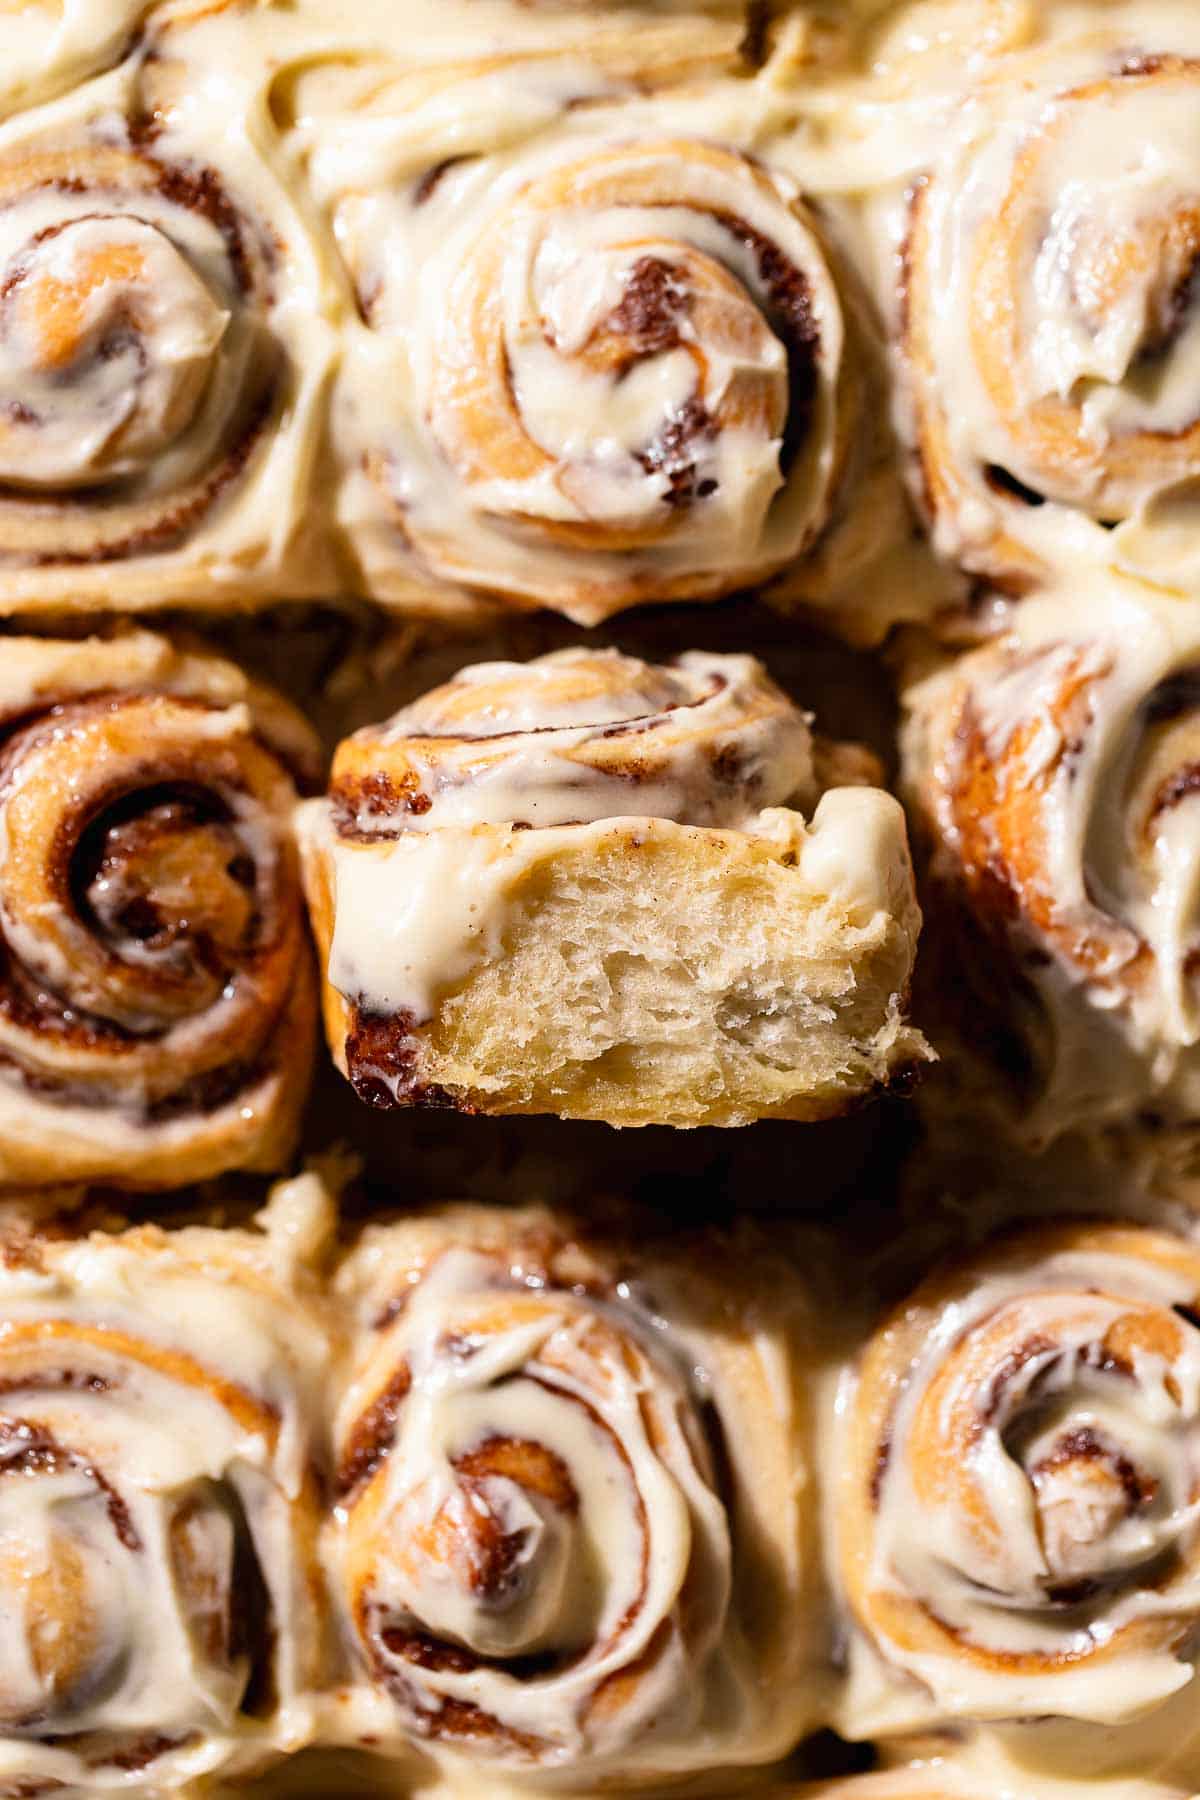 A tray of homemade cinnamon rolls with one on its side to show the gooey and fluffy texture.